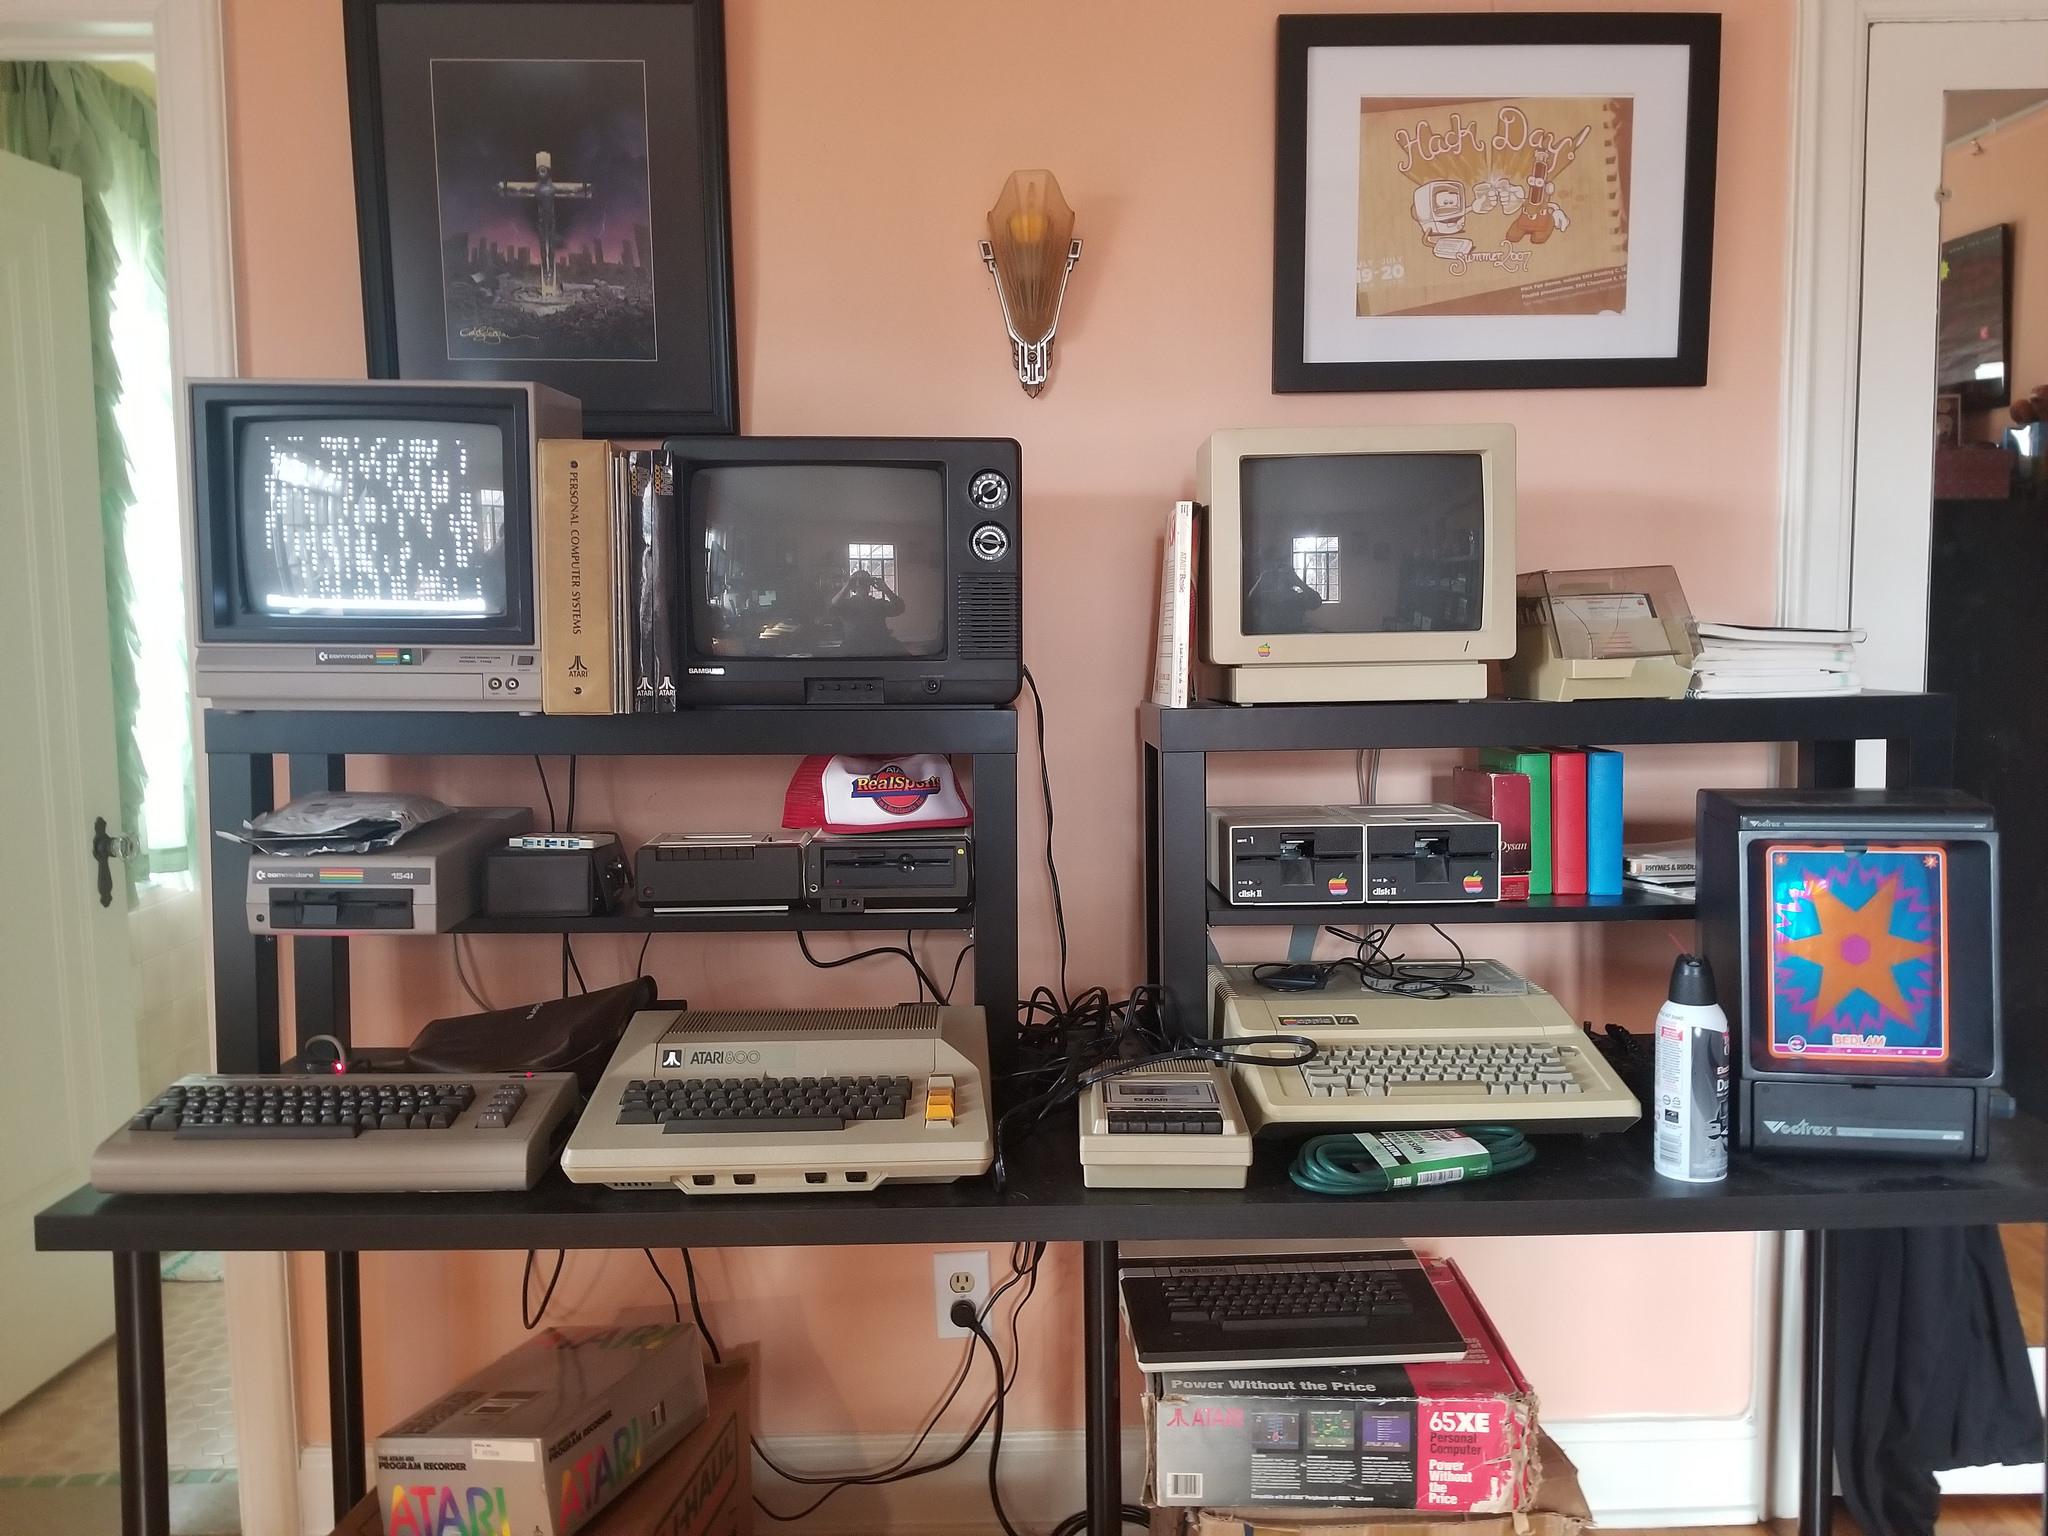 I have a table in my office set up with C64, Atari 800, and Apple IIe